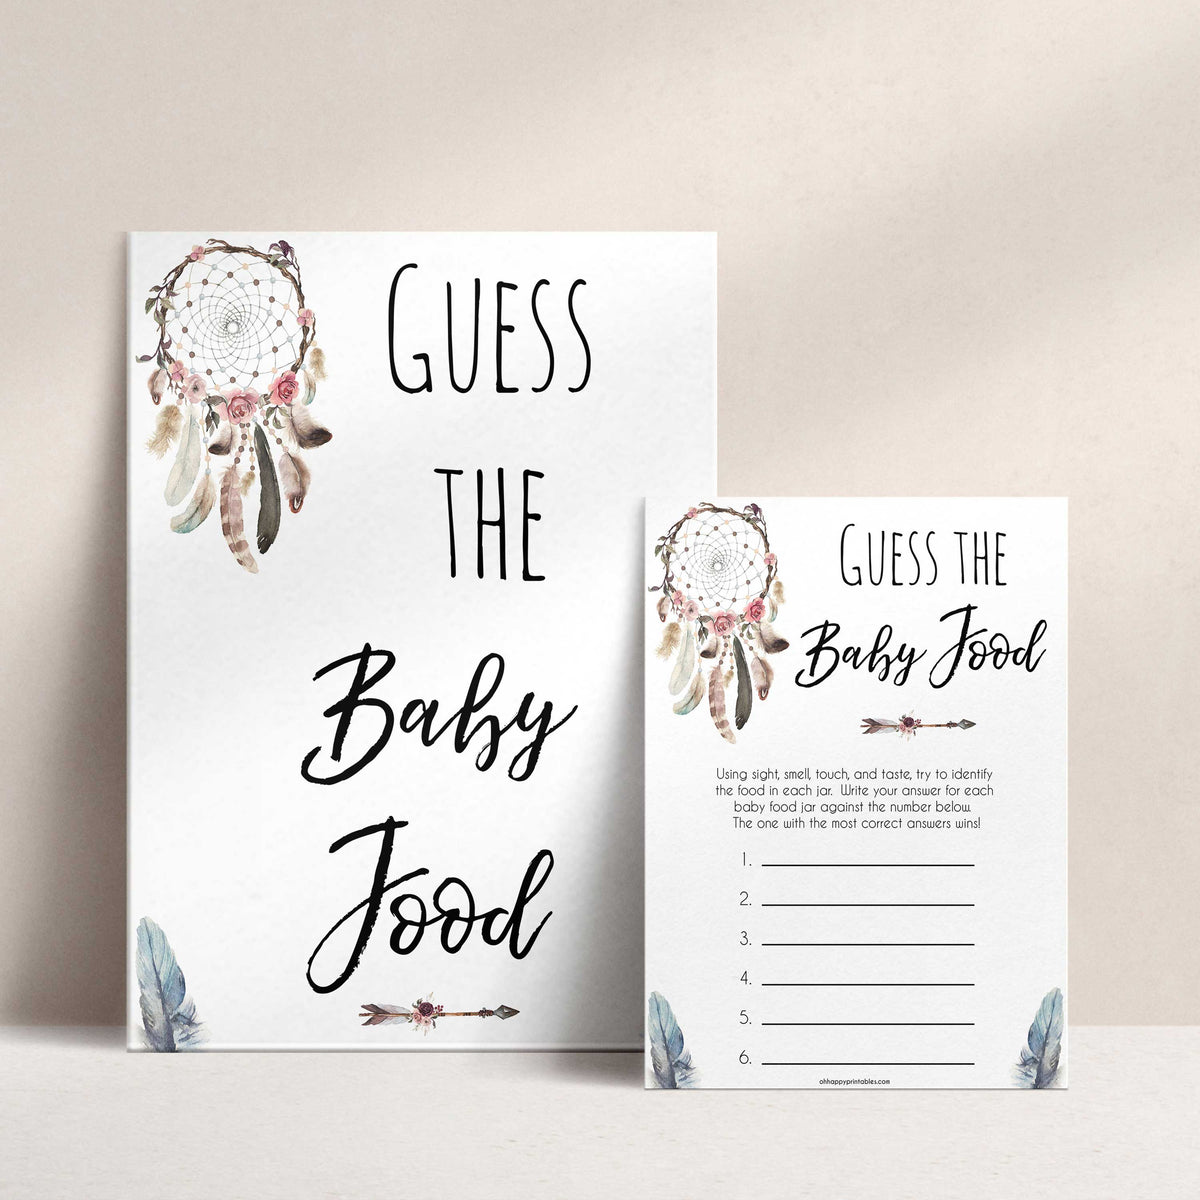 Boho baby games, guess the baby food baby game, fun baby games, printable baby games, top 10 baby games, boho baby shower, baby games, hilarious baby games